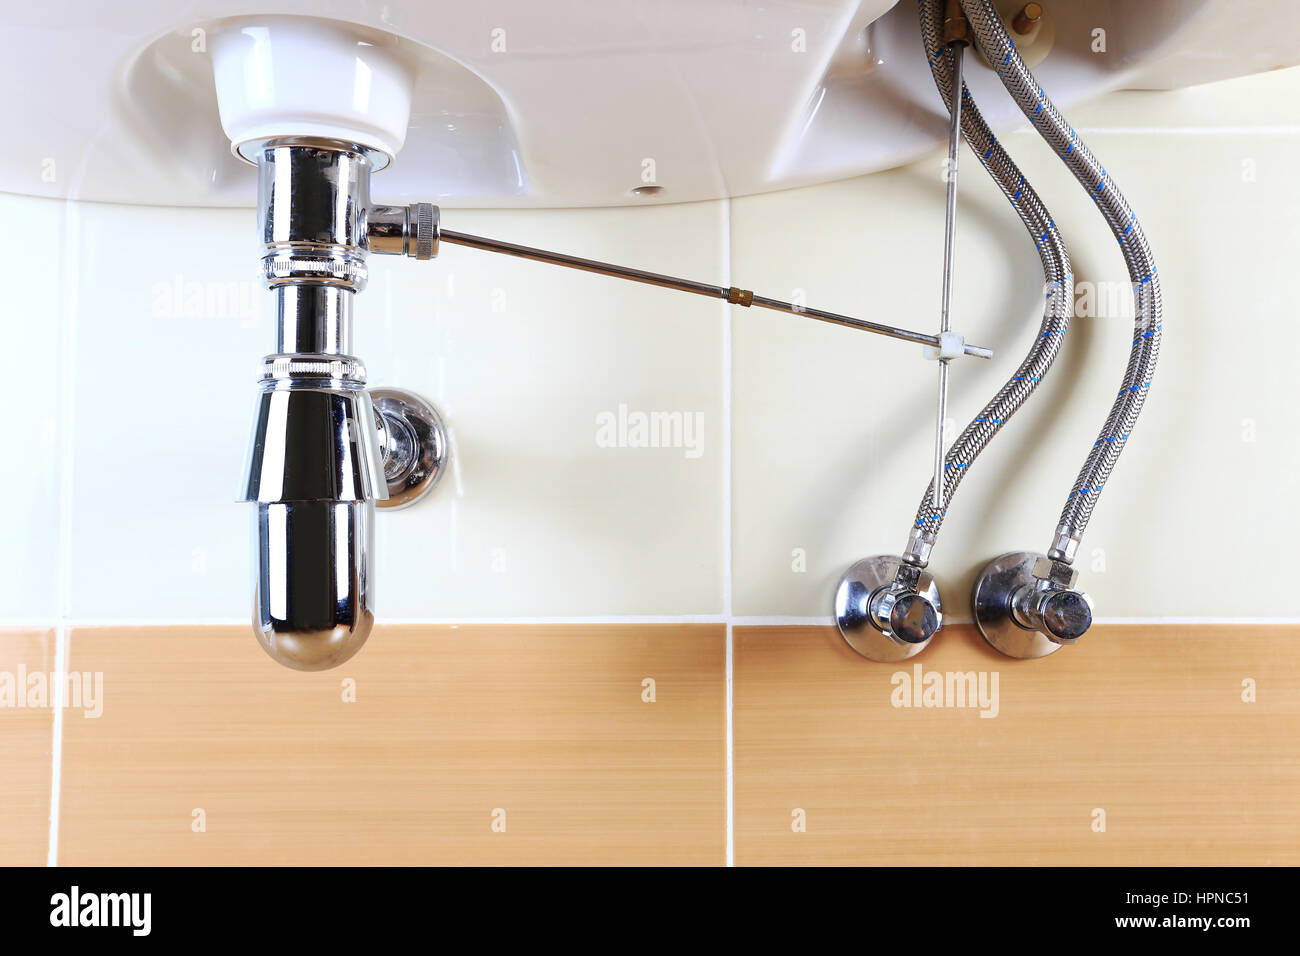 Clean washbasin sink . Chrome pipes and valves. Bright bathroom background. Stock Photo